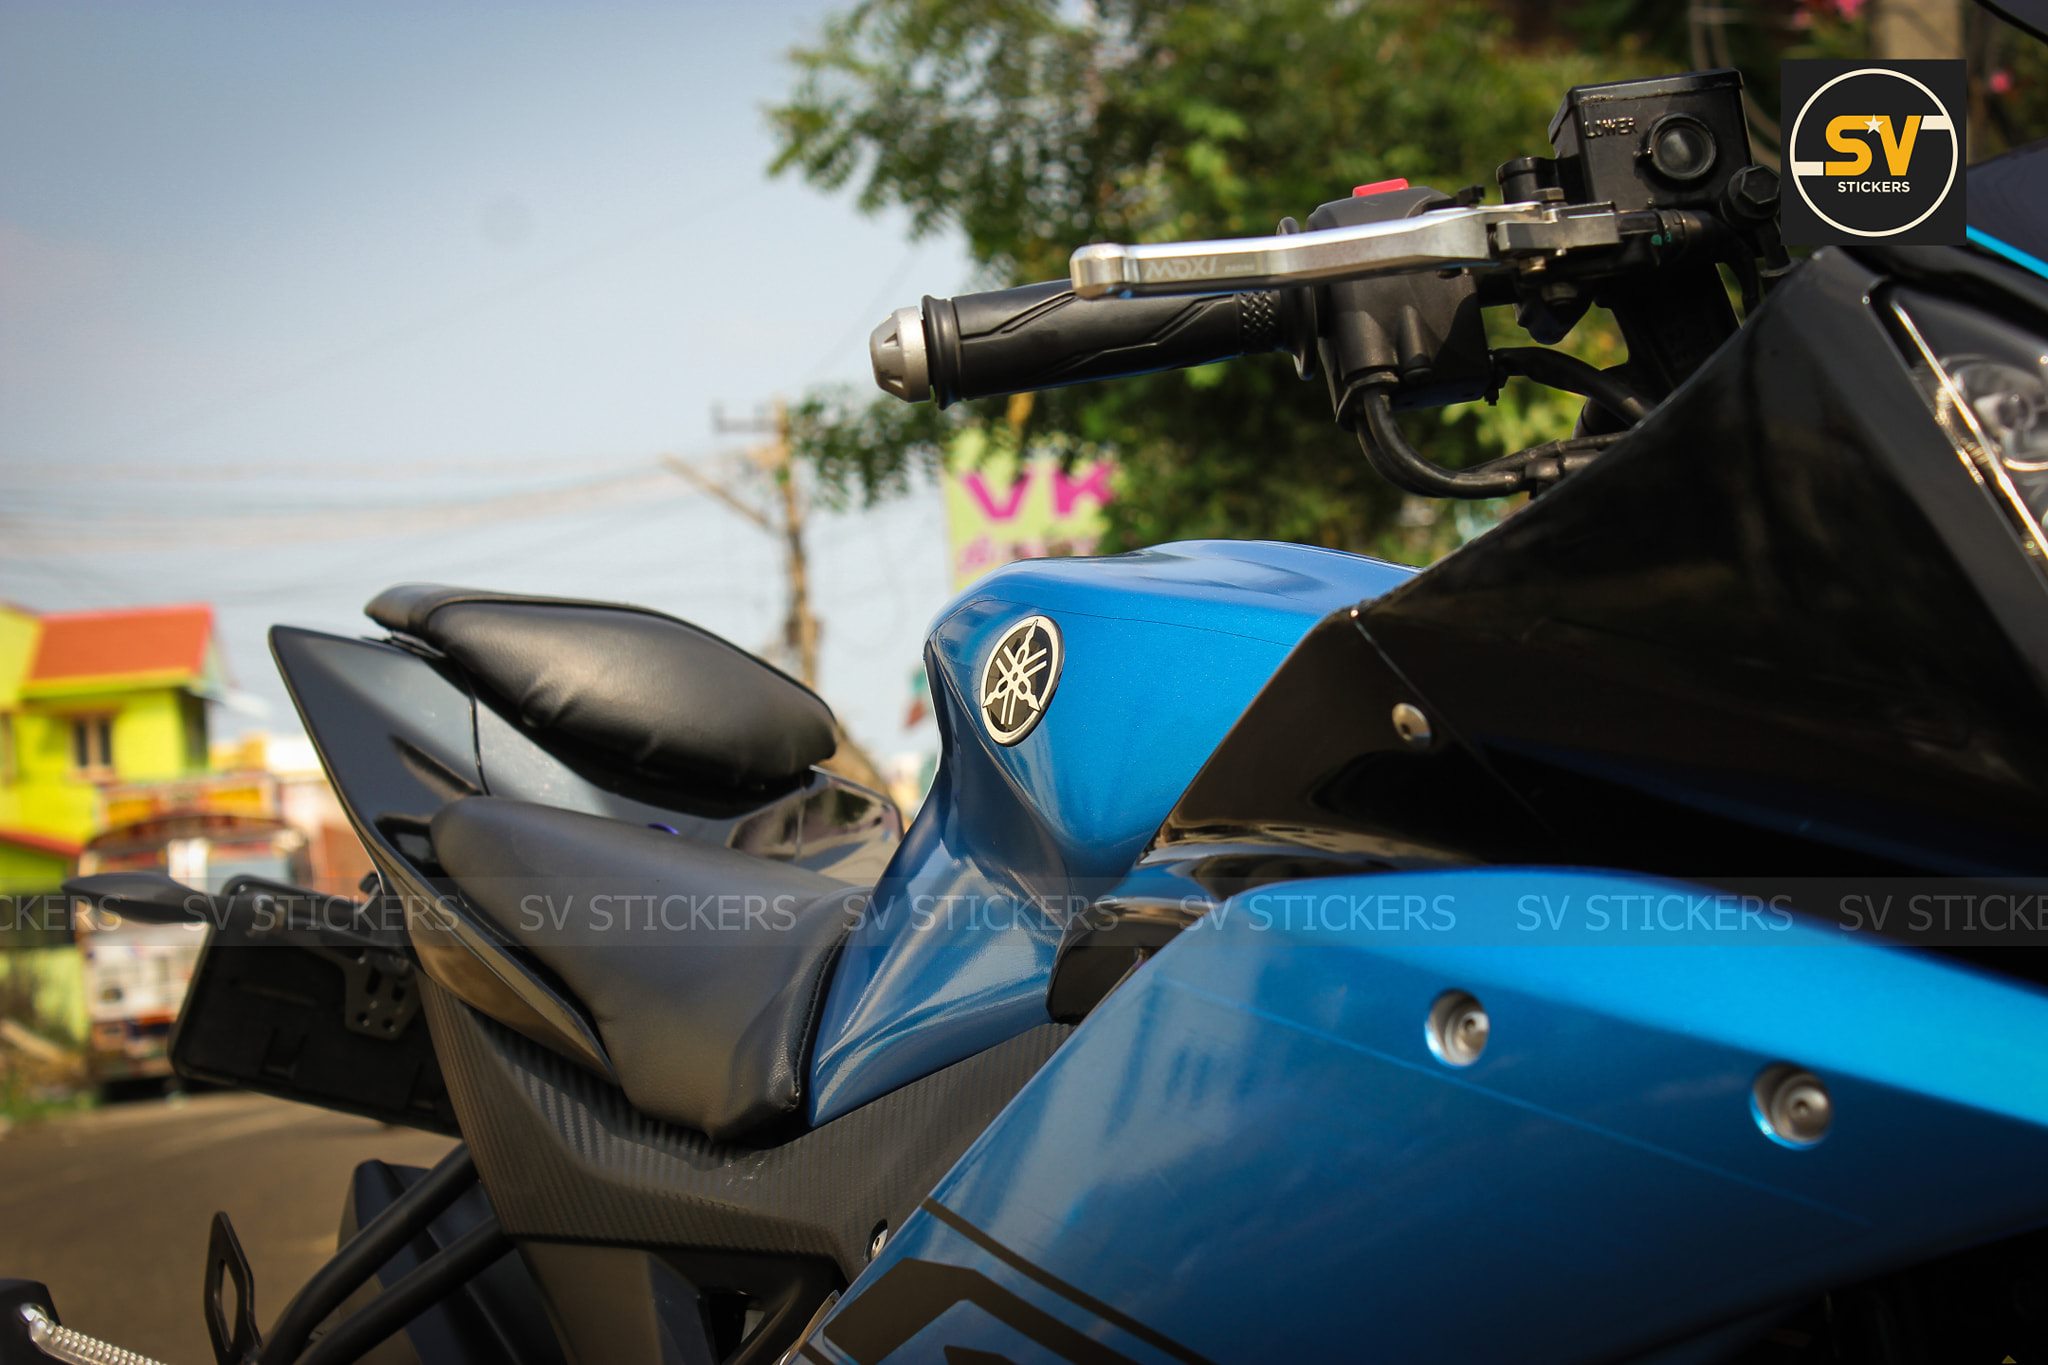 Meet Bright Blue Yamaha R15 Version 2.0 by SV Stickers - image